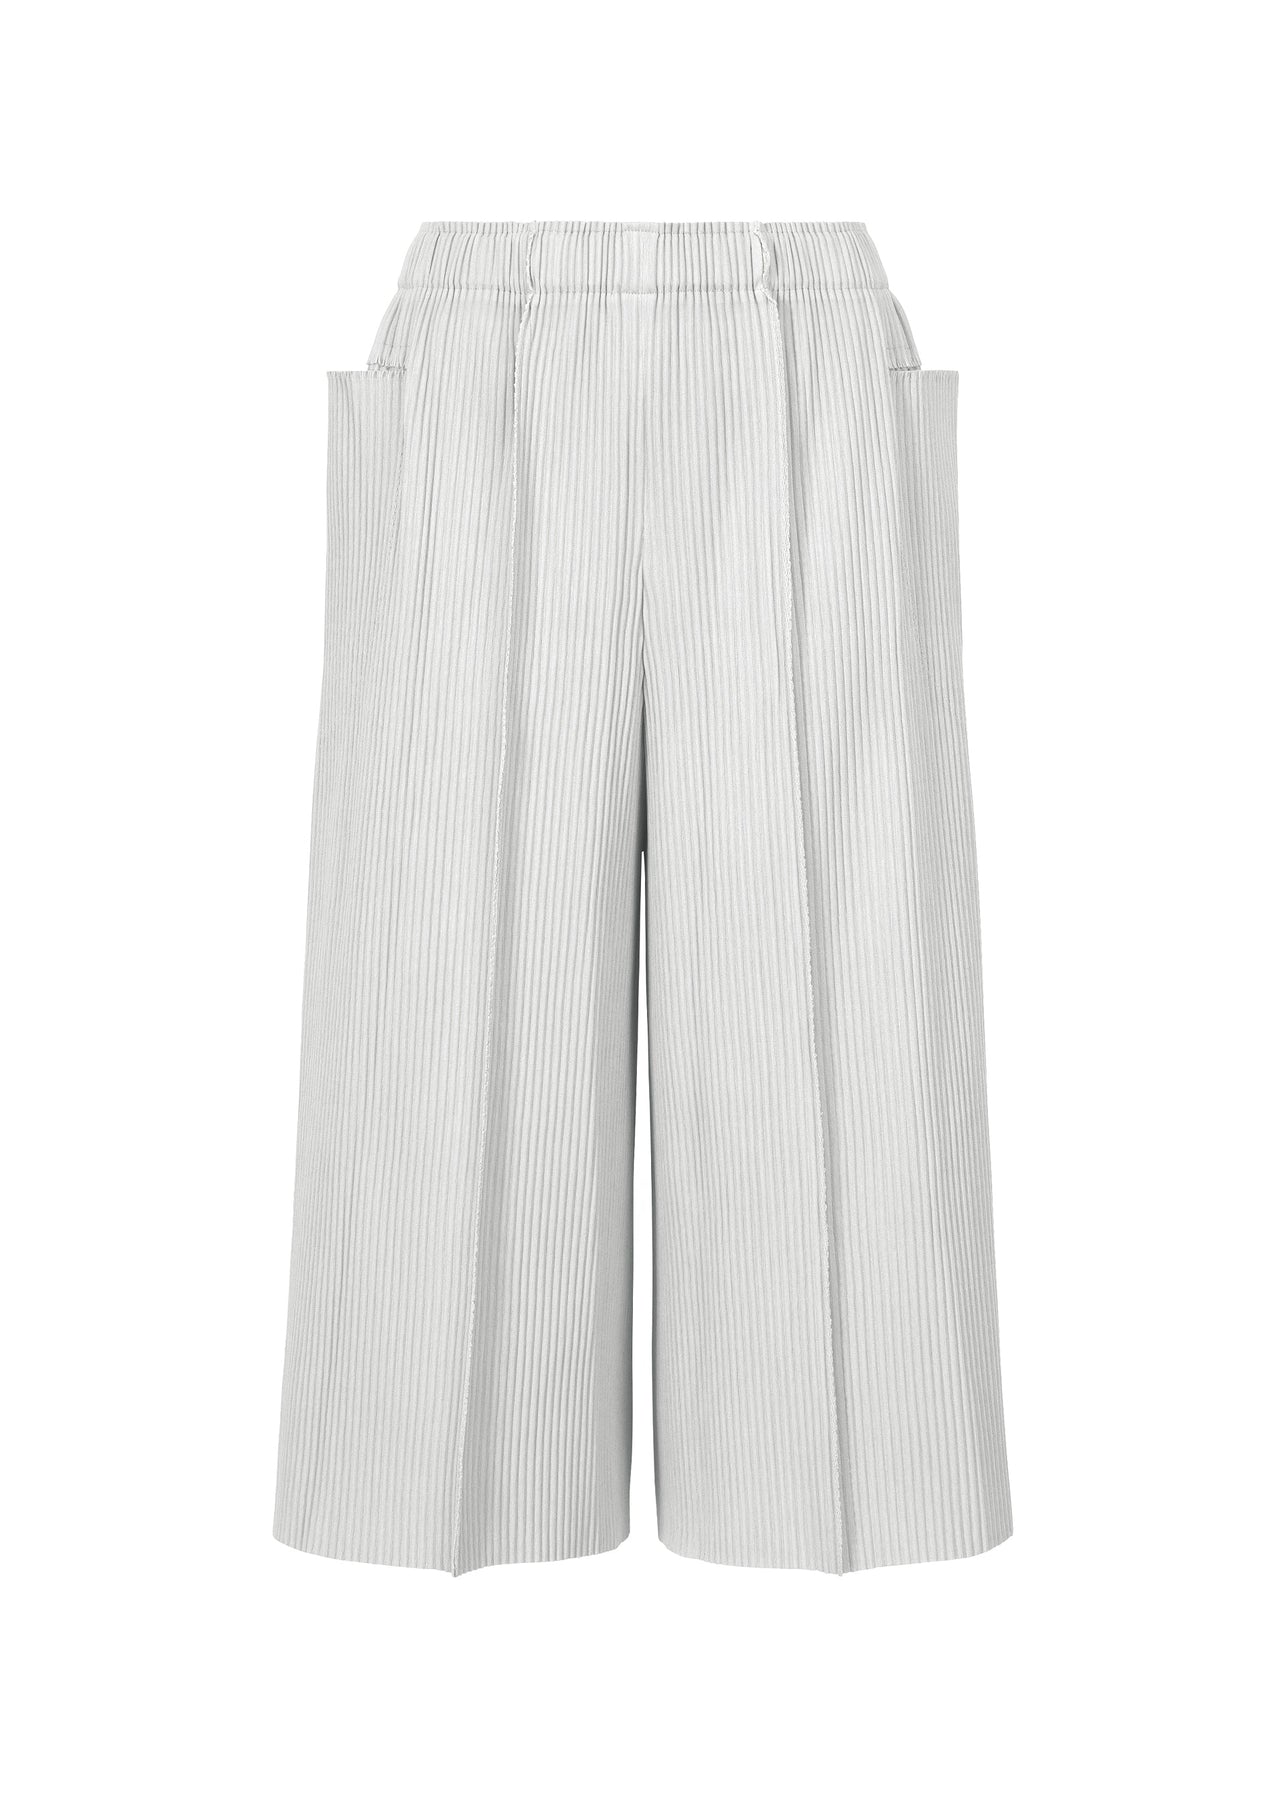 MIX FINE KNIT PLEATS BOTTOMS | The official ISSEY MIYAKE ONLINE